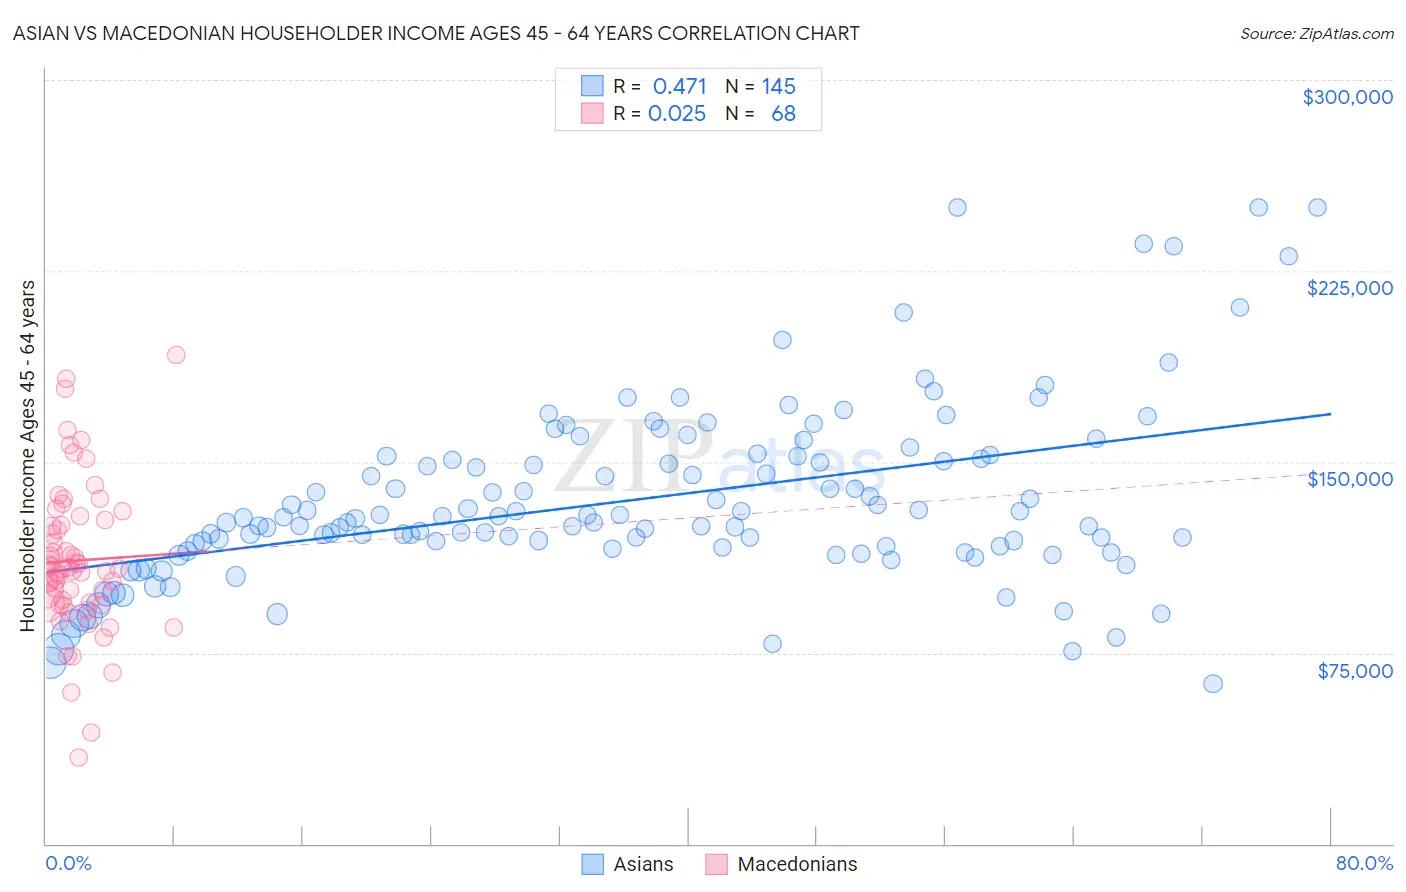 Asian vs Macedonian Householder Income Ages 45 - 64 years